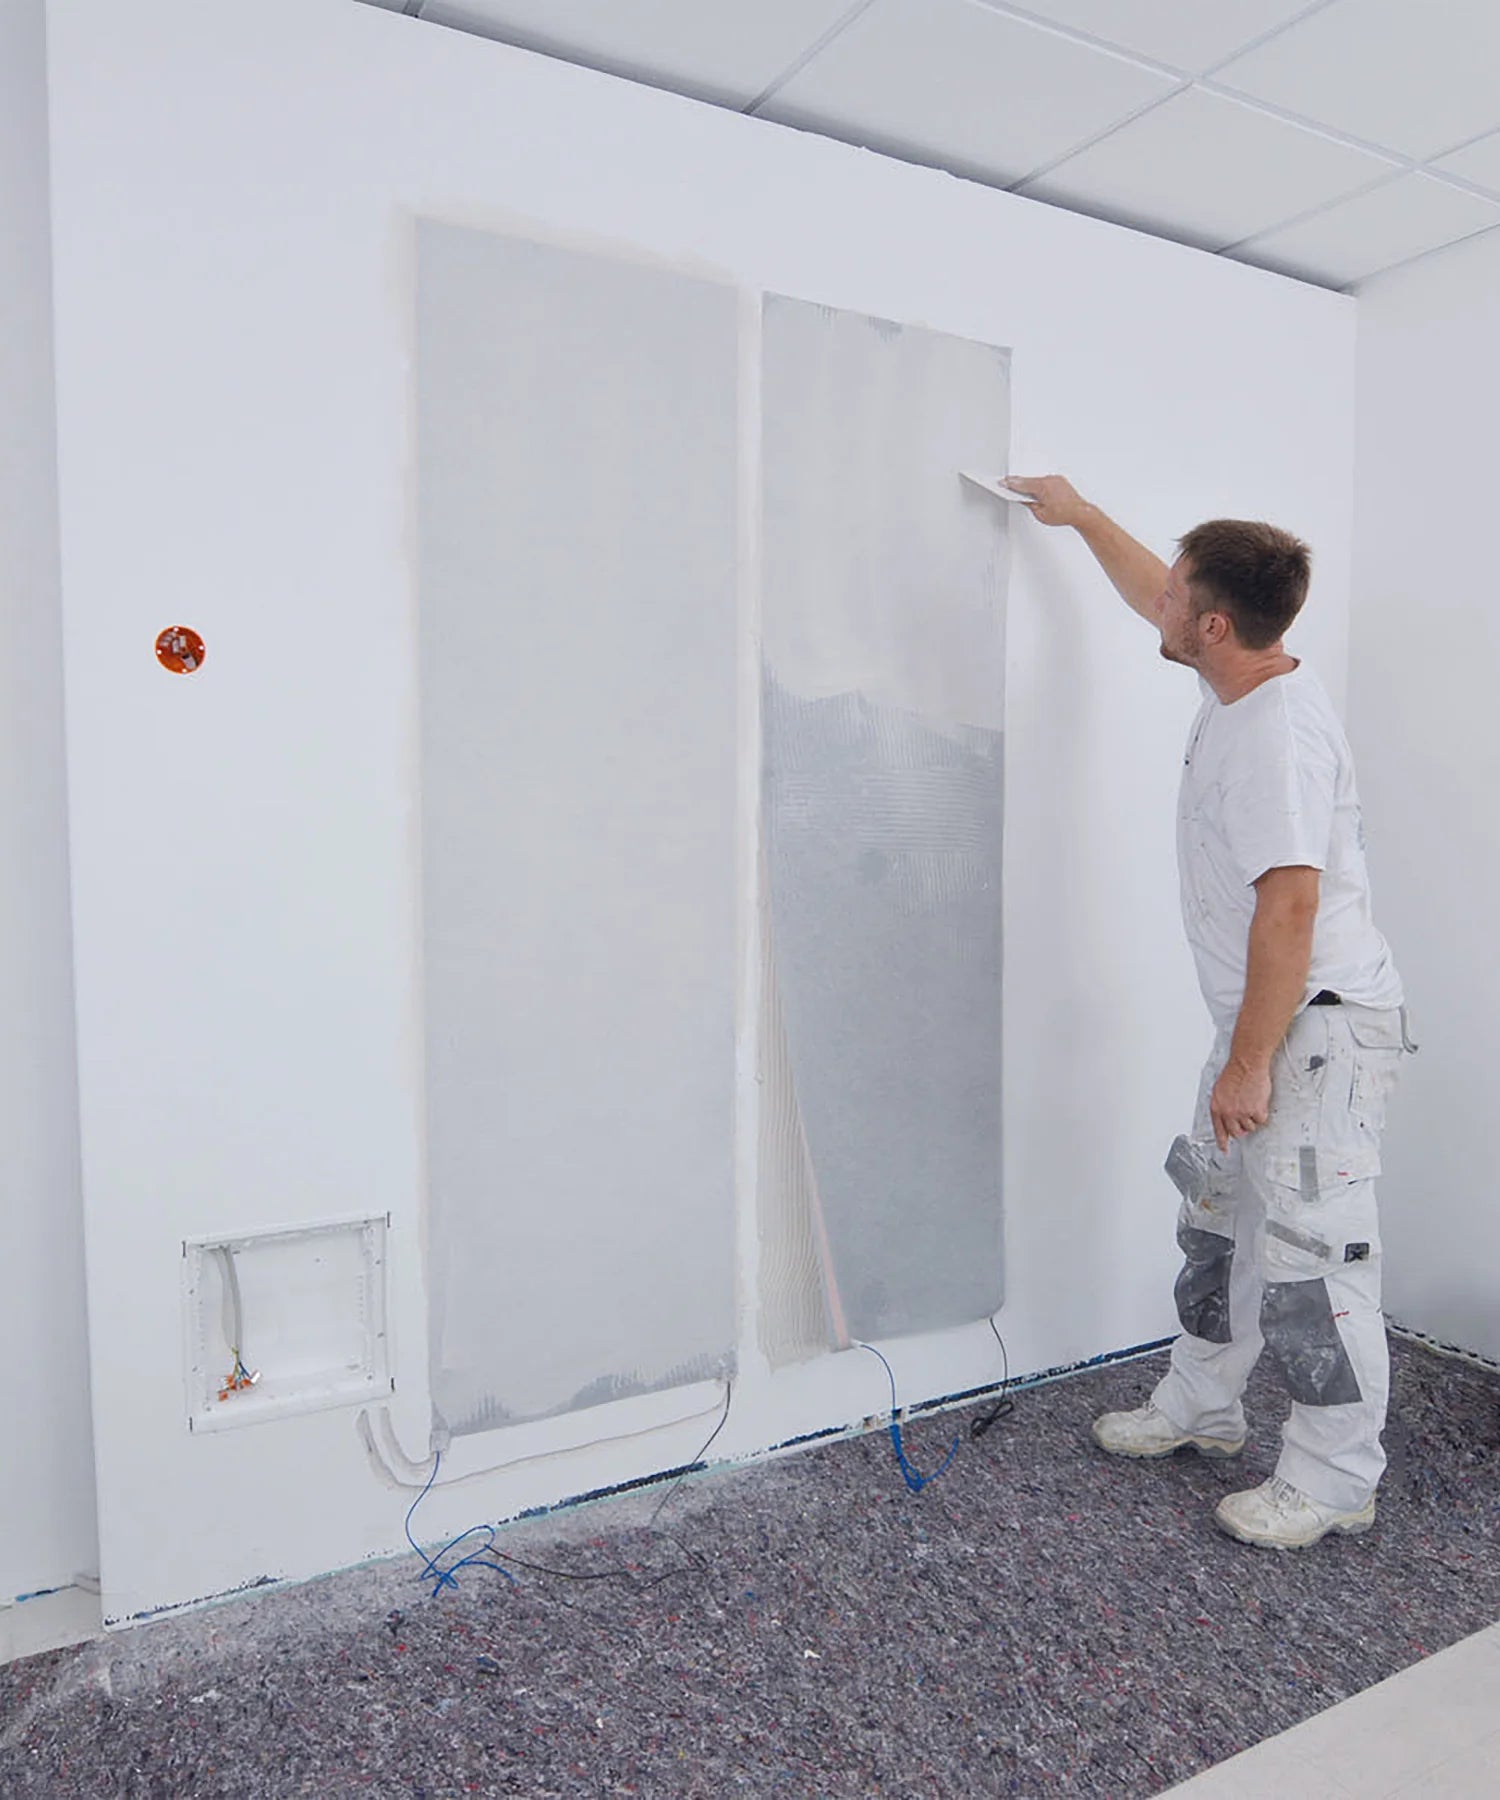 A man doing putty and painting on wall